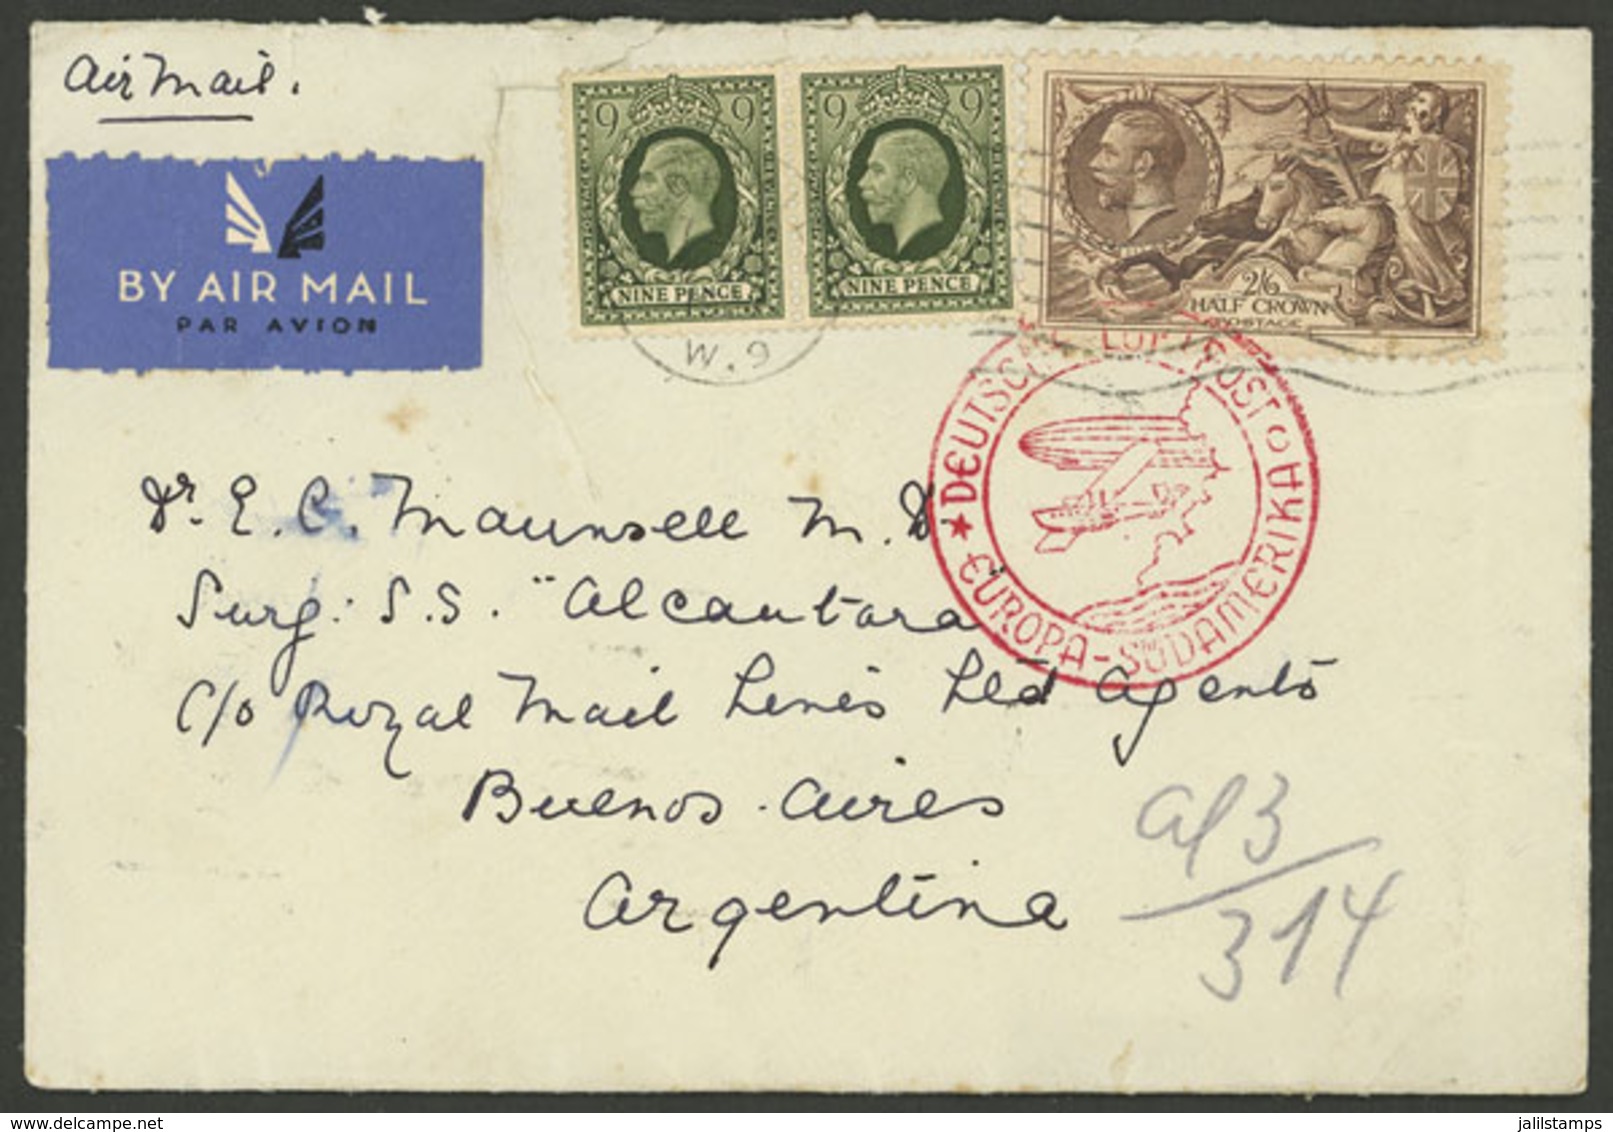 GREAT BRITAIN: JA/1937 London - Argentina, Airmail Cover Sent By German DLH, With Arrival Backstamps Of Buenos Aires, Ve - Brieven En Documenten